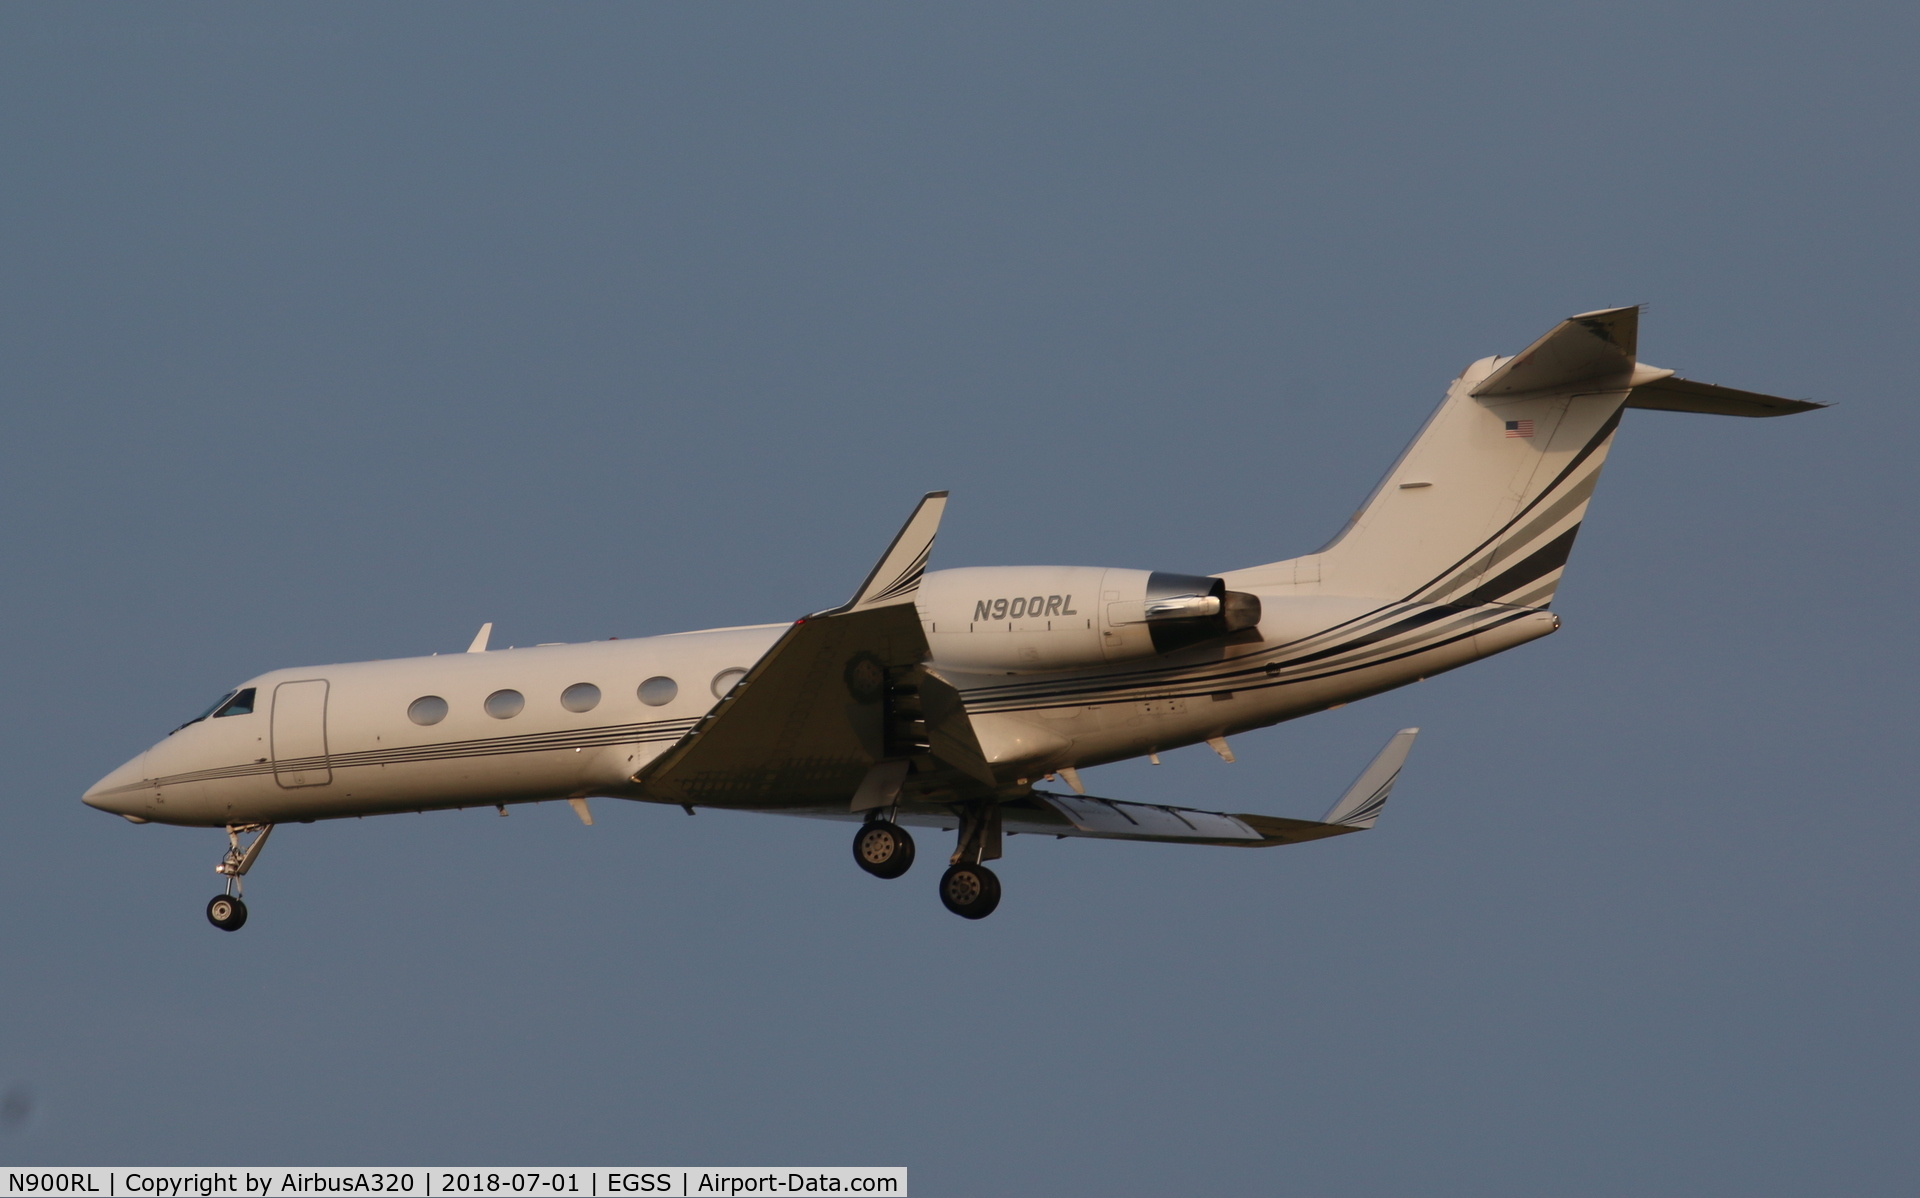 N900RL, 1990 Gulfstream Aerospace G-IV C/N 1150, Arriving at Stansted